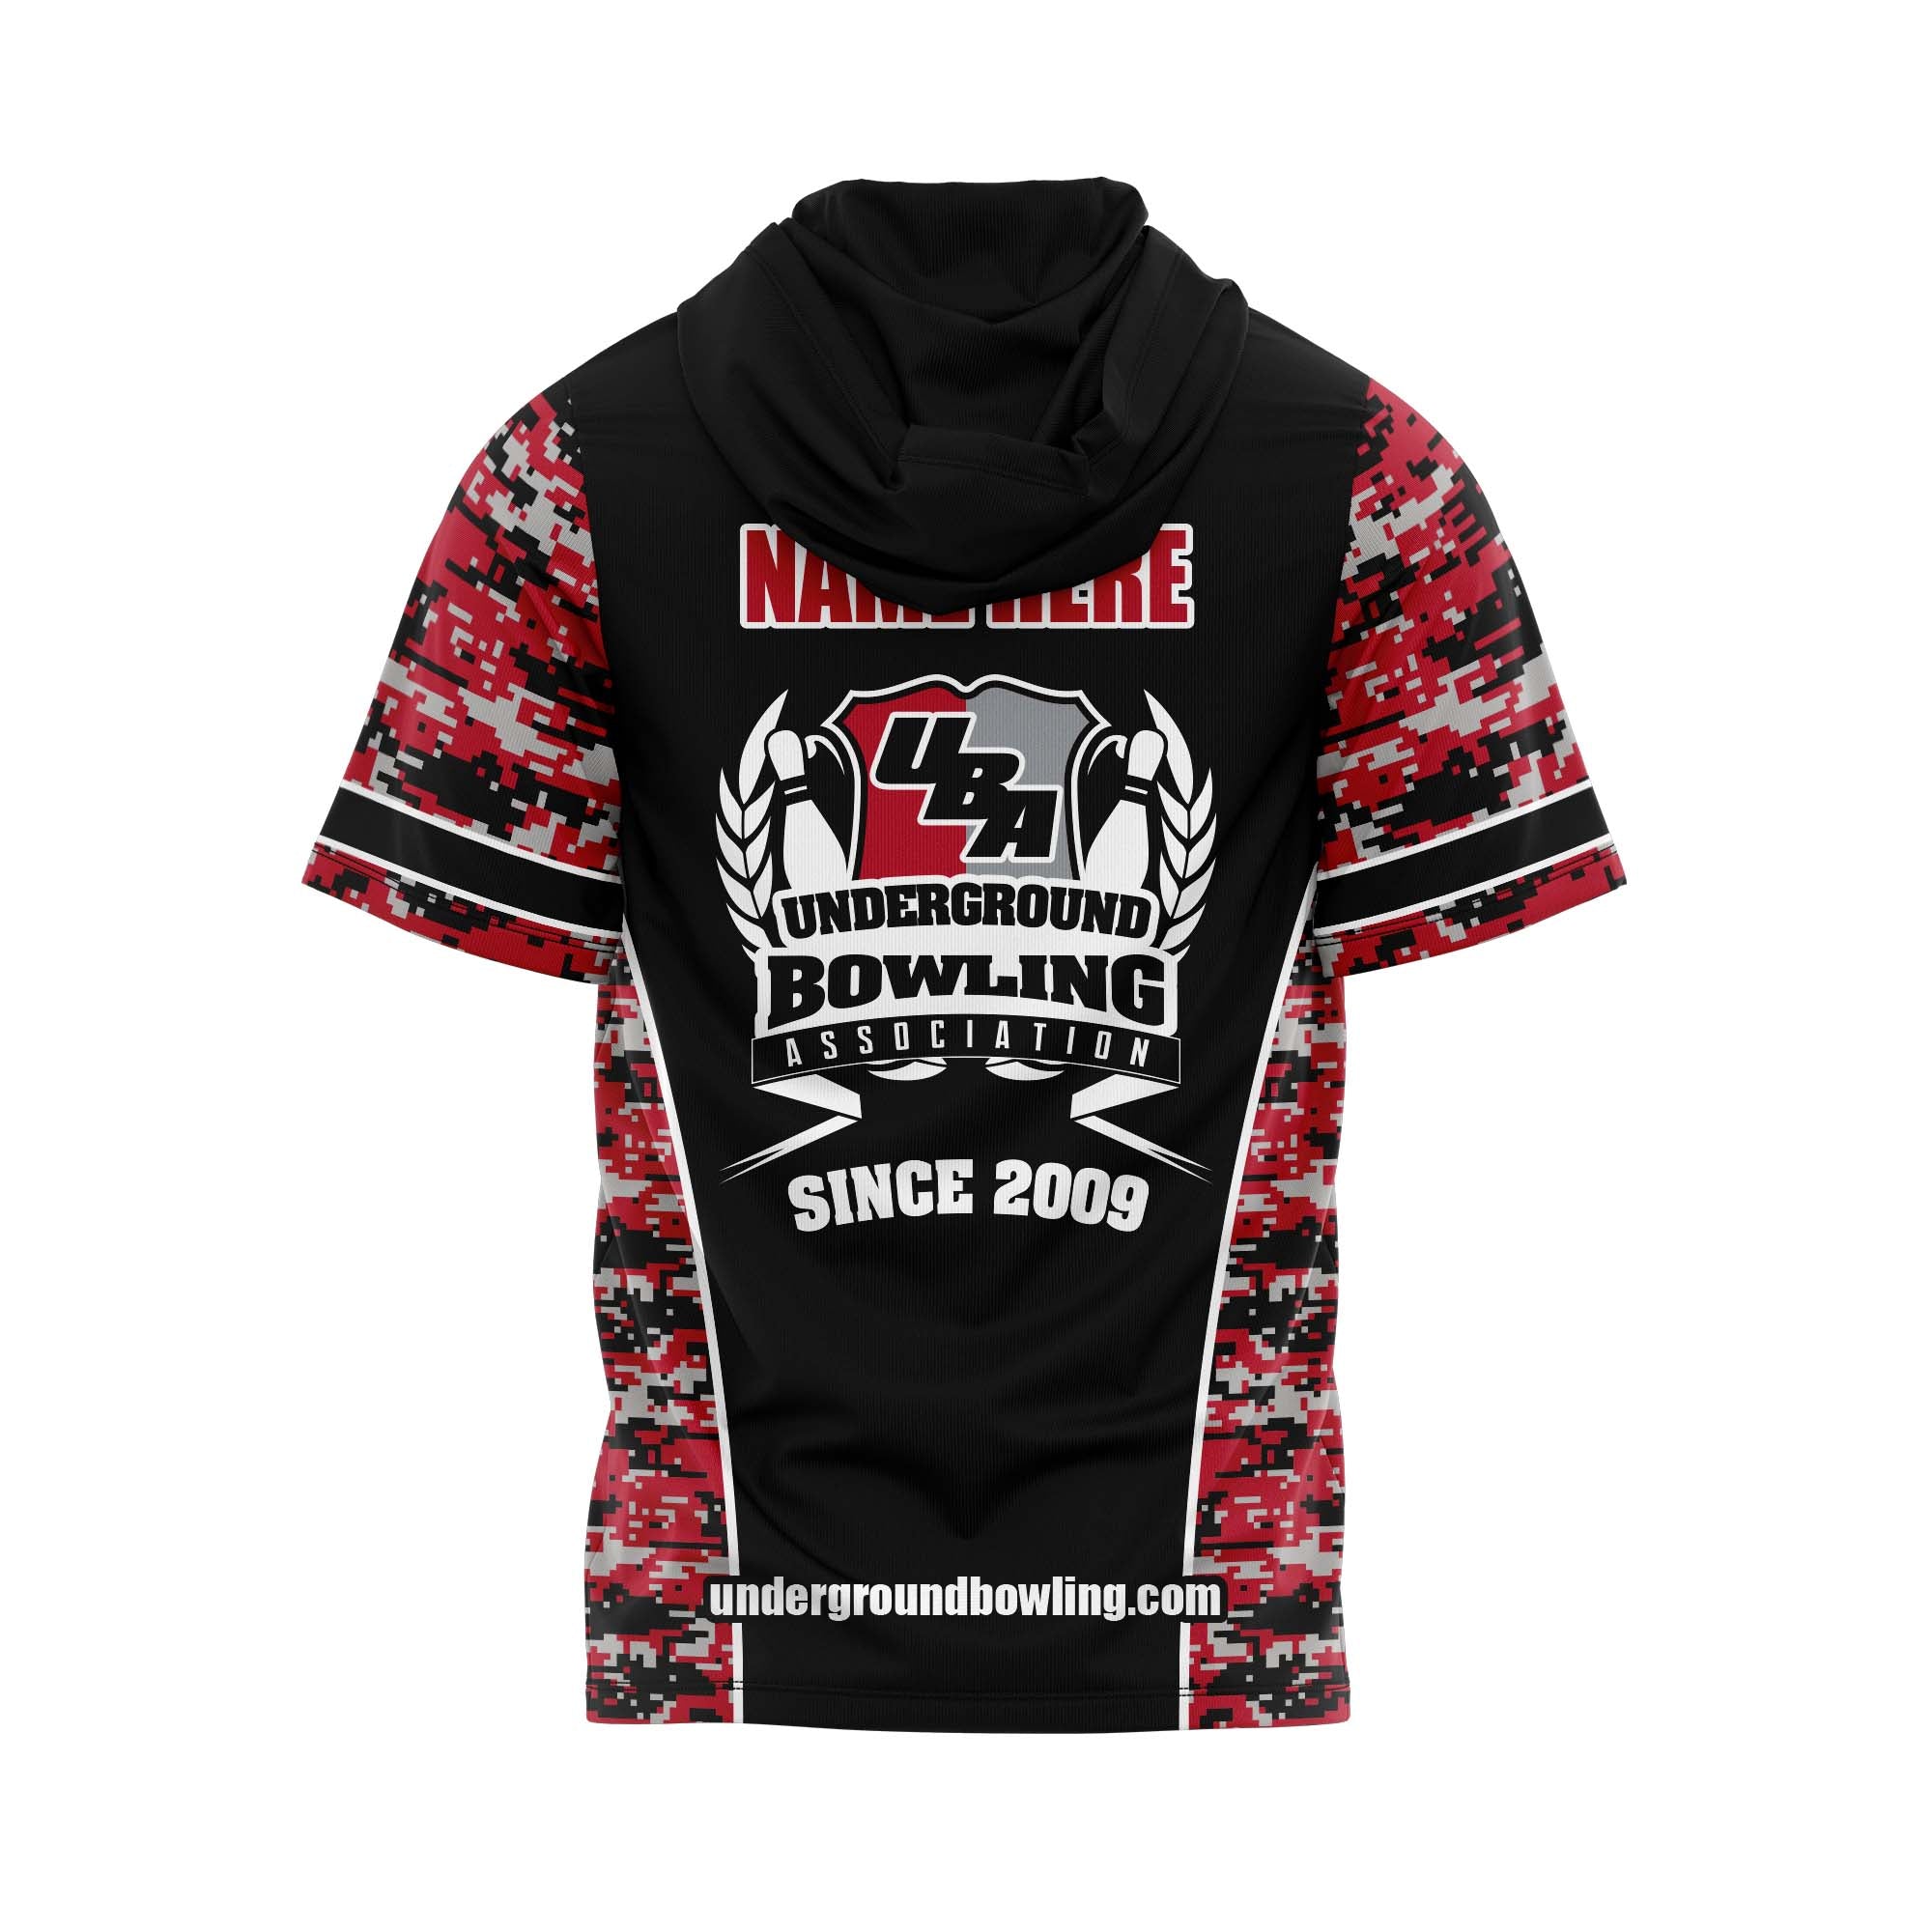 The Expendables Splatter Camo Jersey